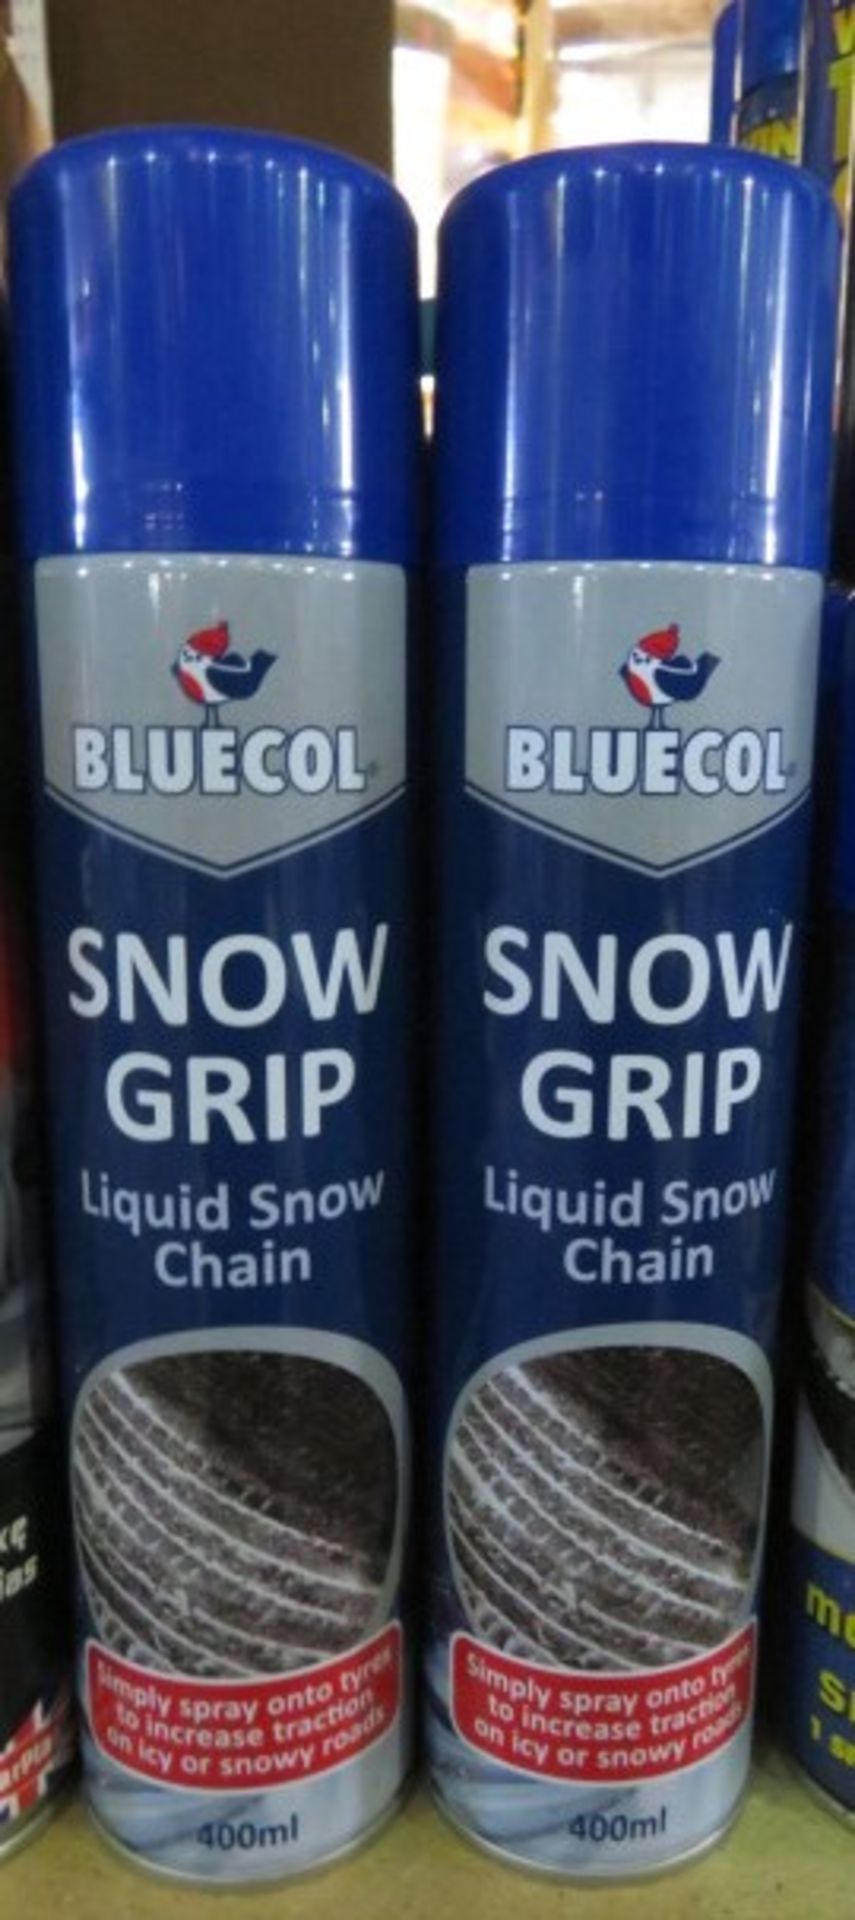 12x Bluecol Snow Grip Spray. 400ml. UK DELIVERY AVAILABLE FROM £14 PLUS VAT - HUGE PROFIT POTE...